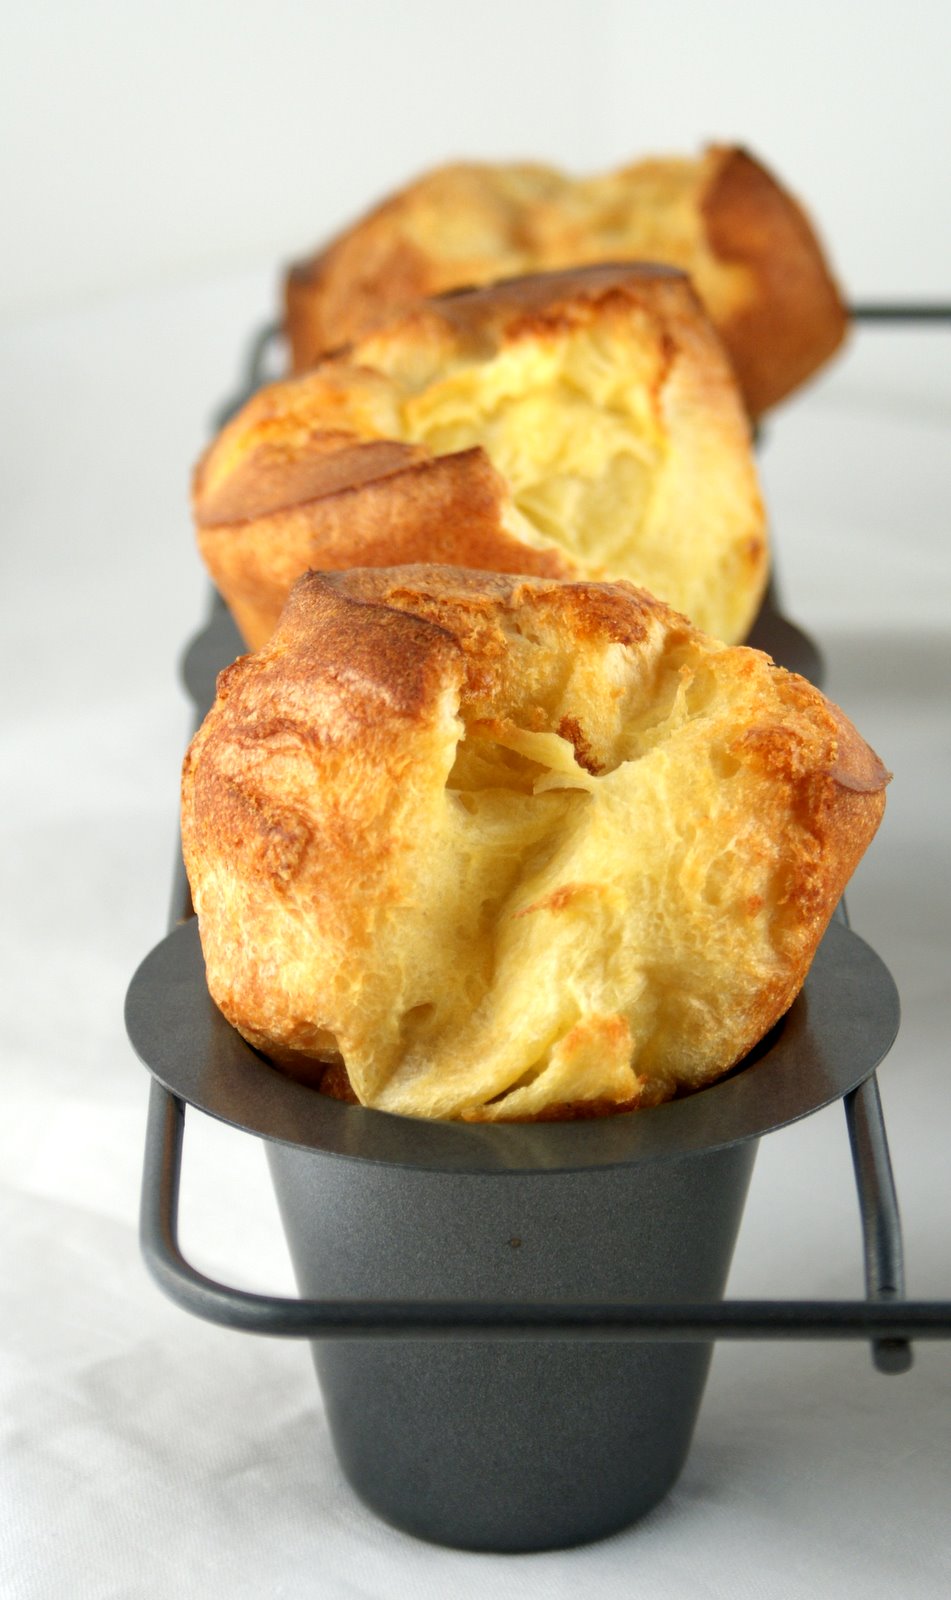 Popover time: Downtown Dallas' beloved Zodiac Room at Neiman